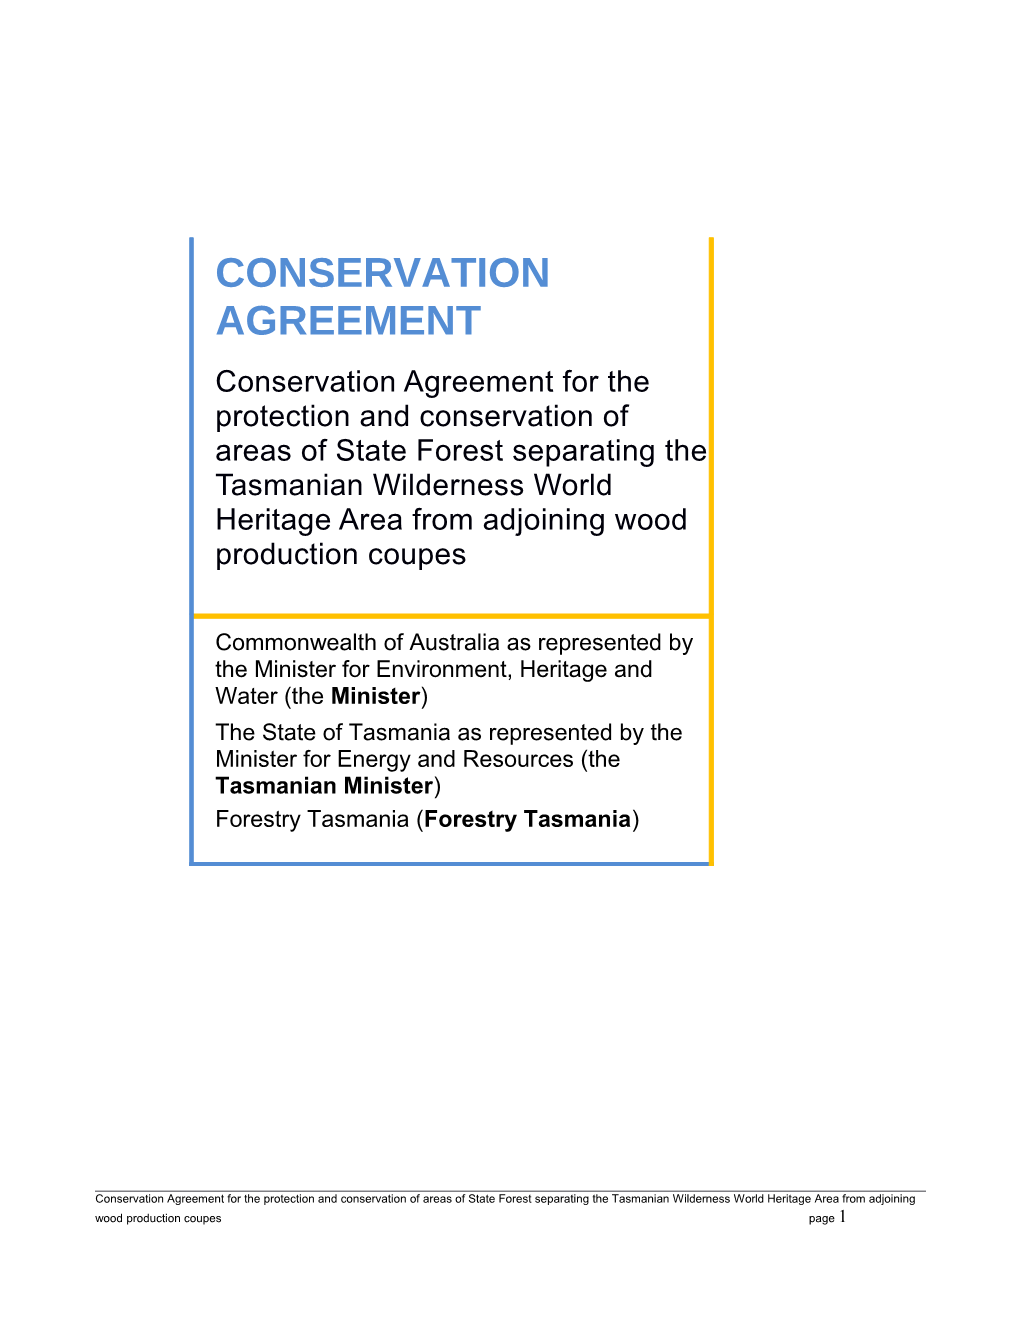 Conservation Agreement for the Protection and Conservation of Areas of State Forest Separating